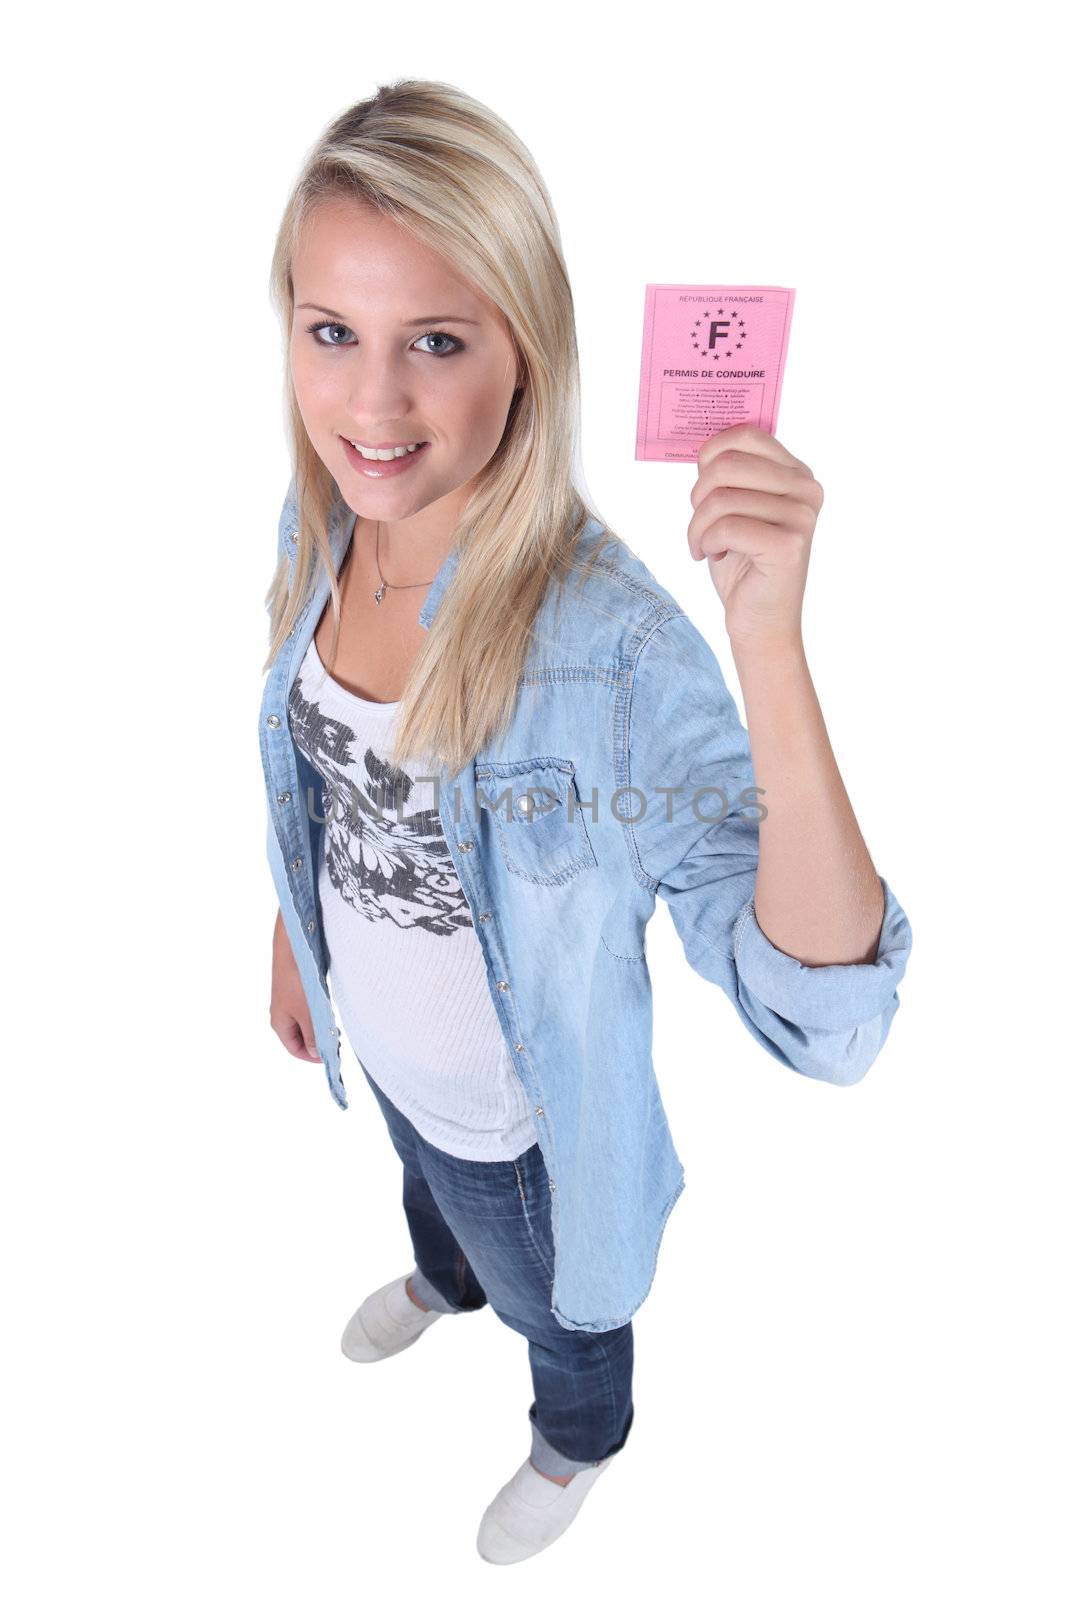 Blond teenage girl holding driving license